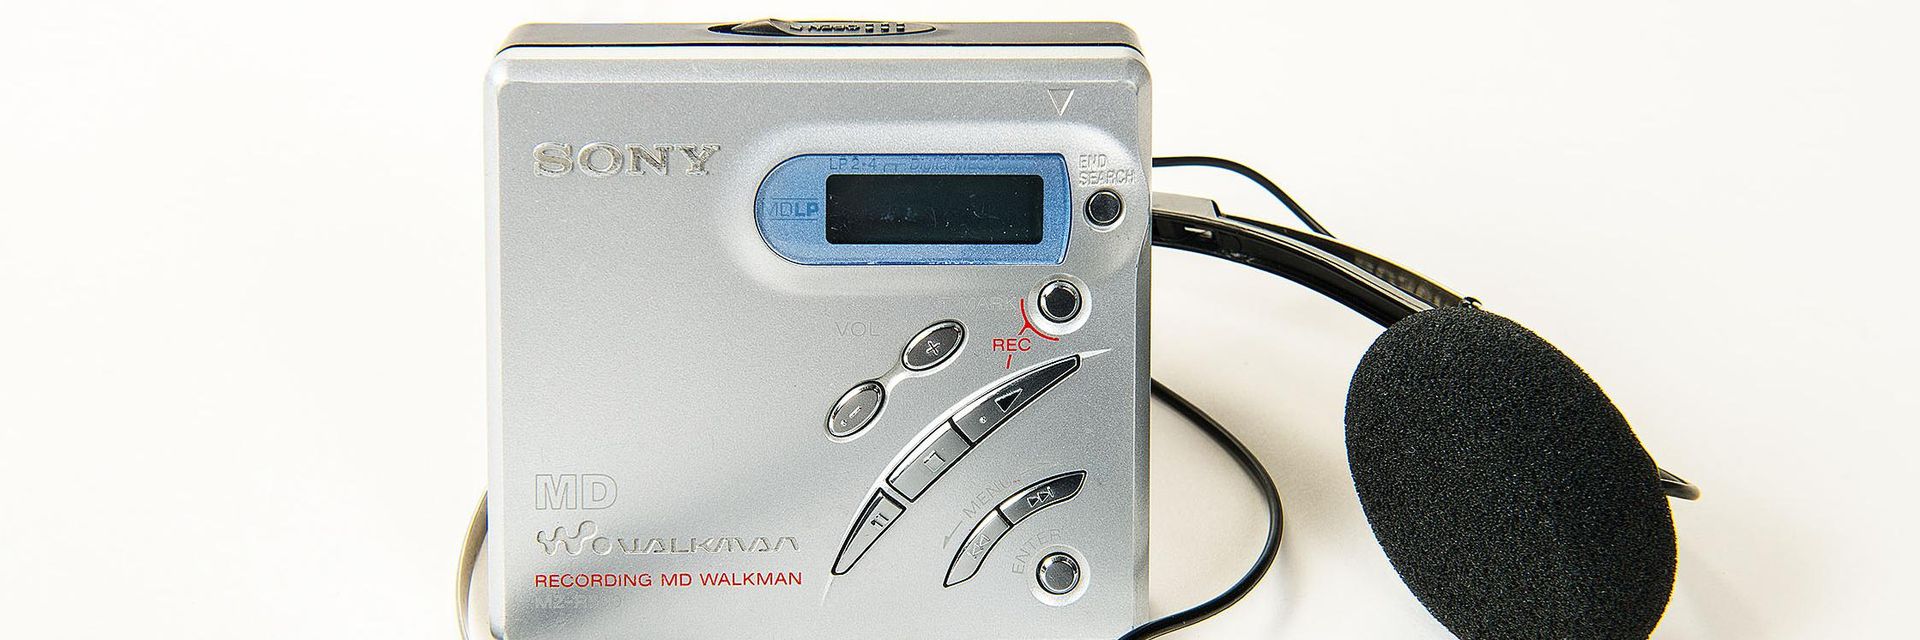 This MZ-R500 MiniDisc Recorder has the shape of a small square box with asymmetrically arranged function keys and a silver colored aluminum surface.